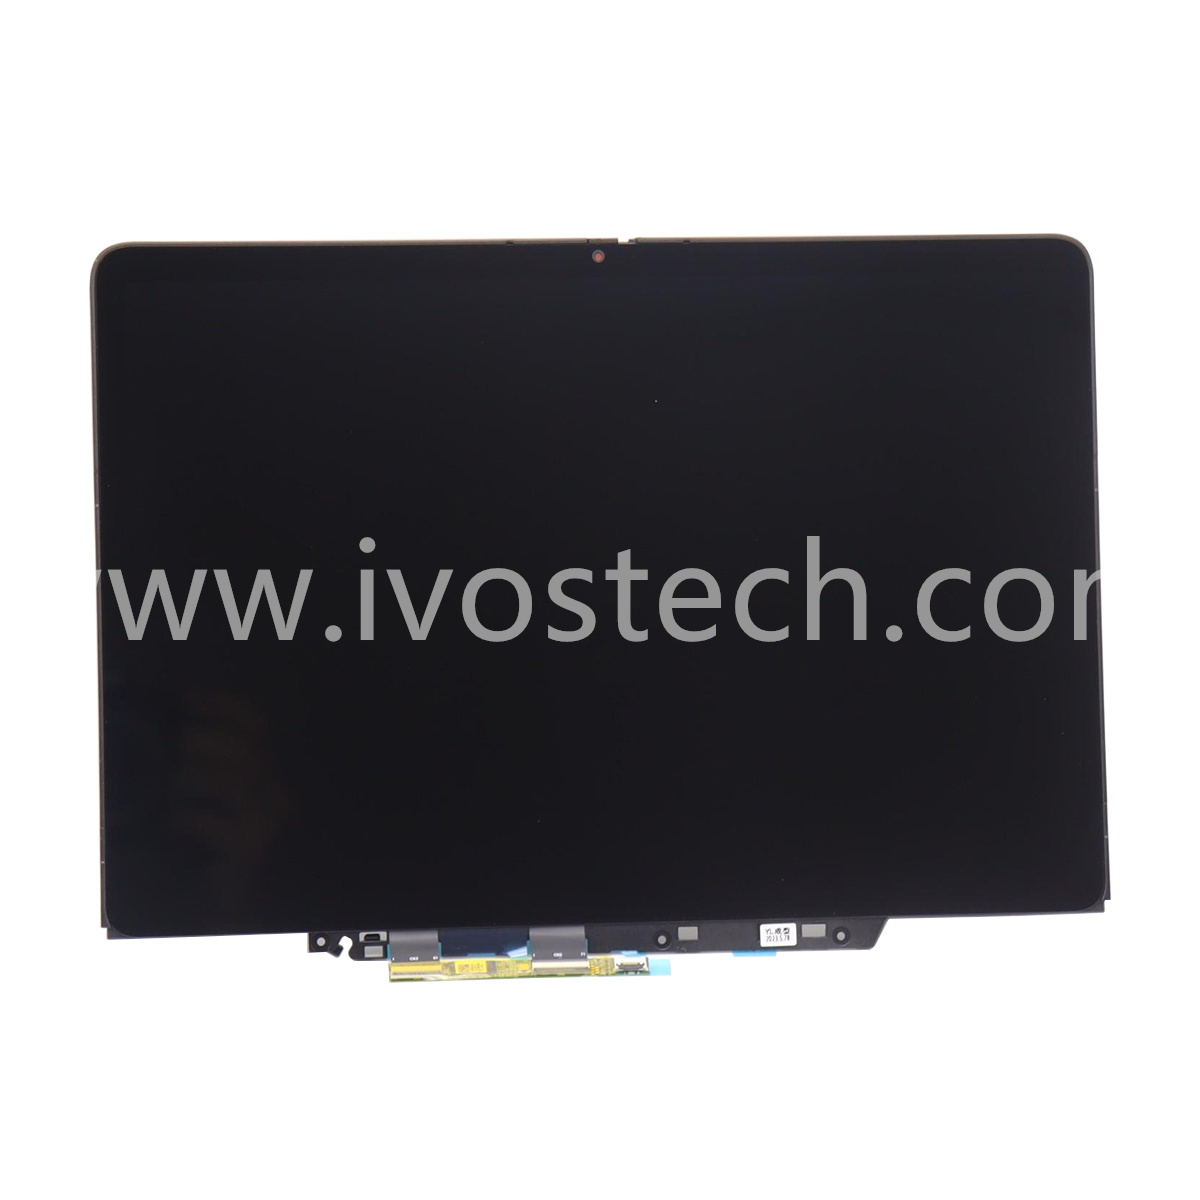 5D11C95914 12.2” Laptop LCD Touch Screen Display with Bezel Assembly for Lenovo 500e Yoga Chromebook Gen 4 82W4 82W5